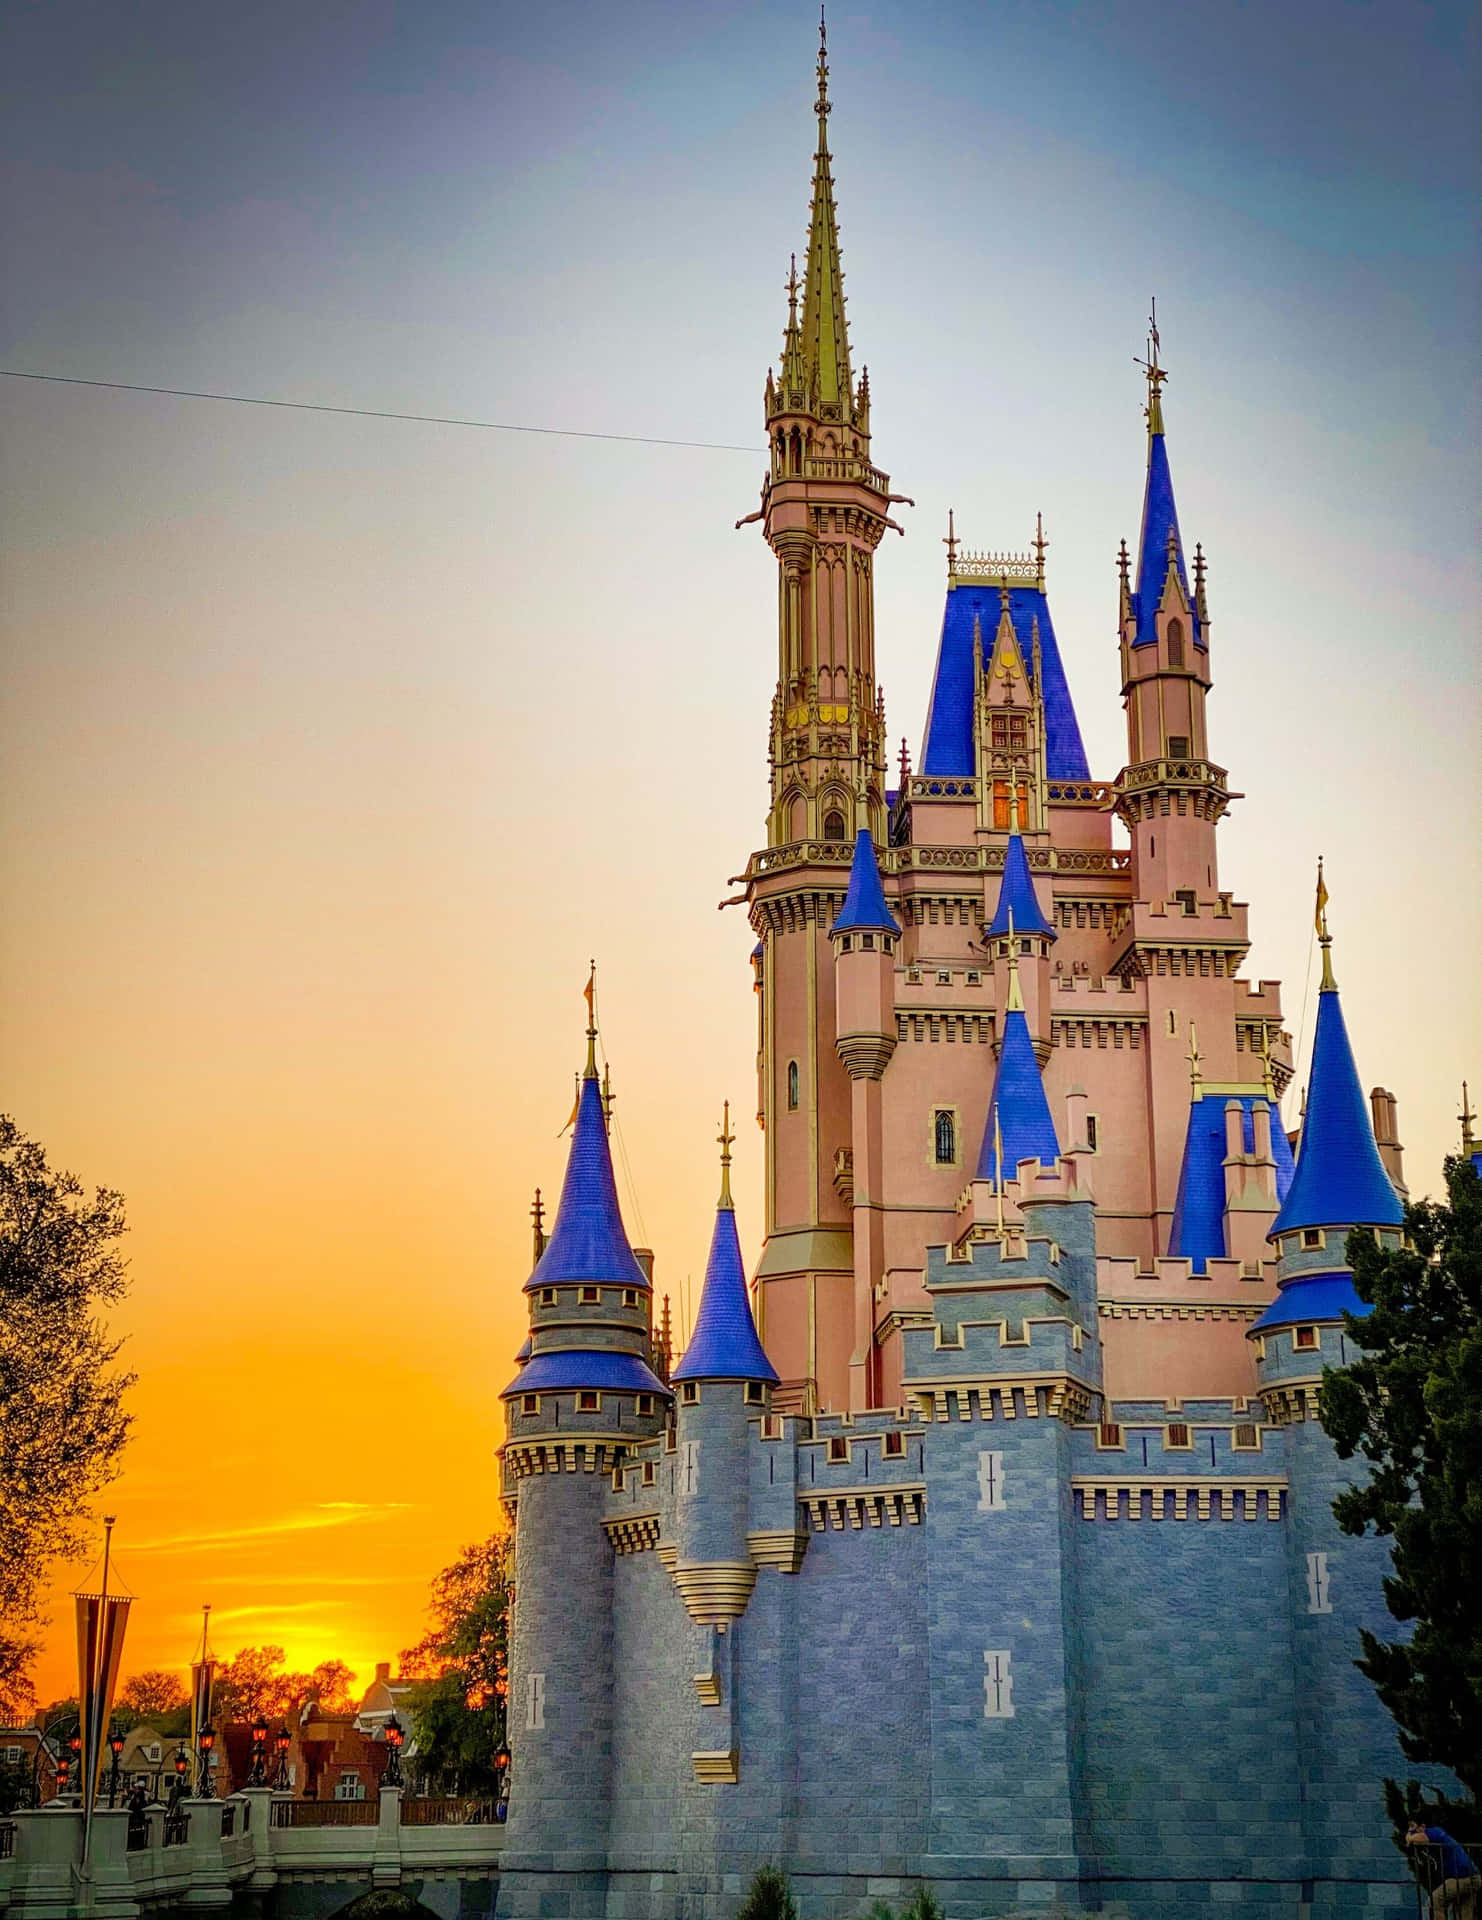 Explore magic at the Happiest Place on Earth - Disney World Wallpaper